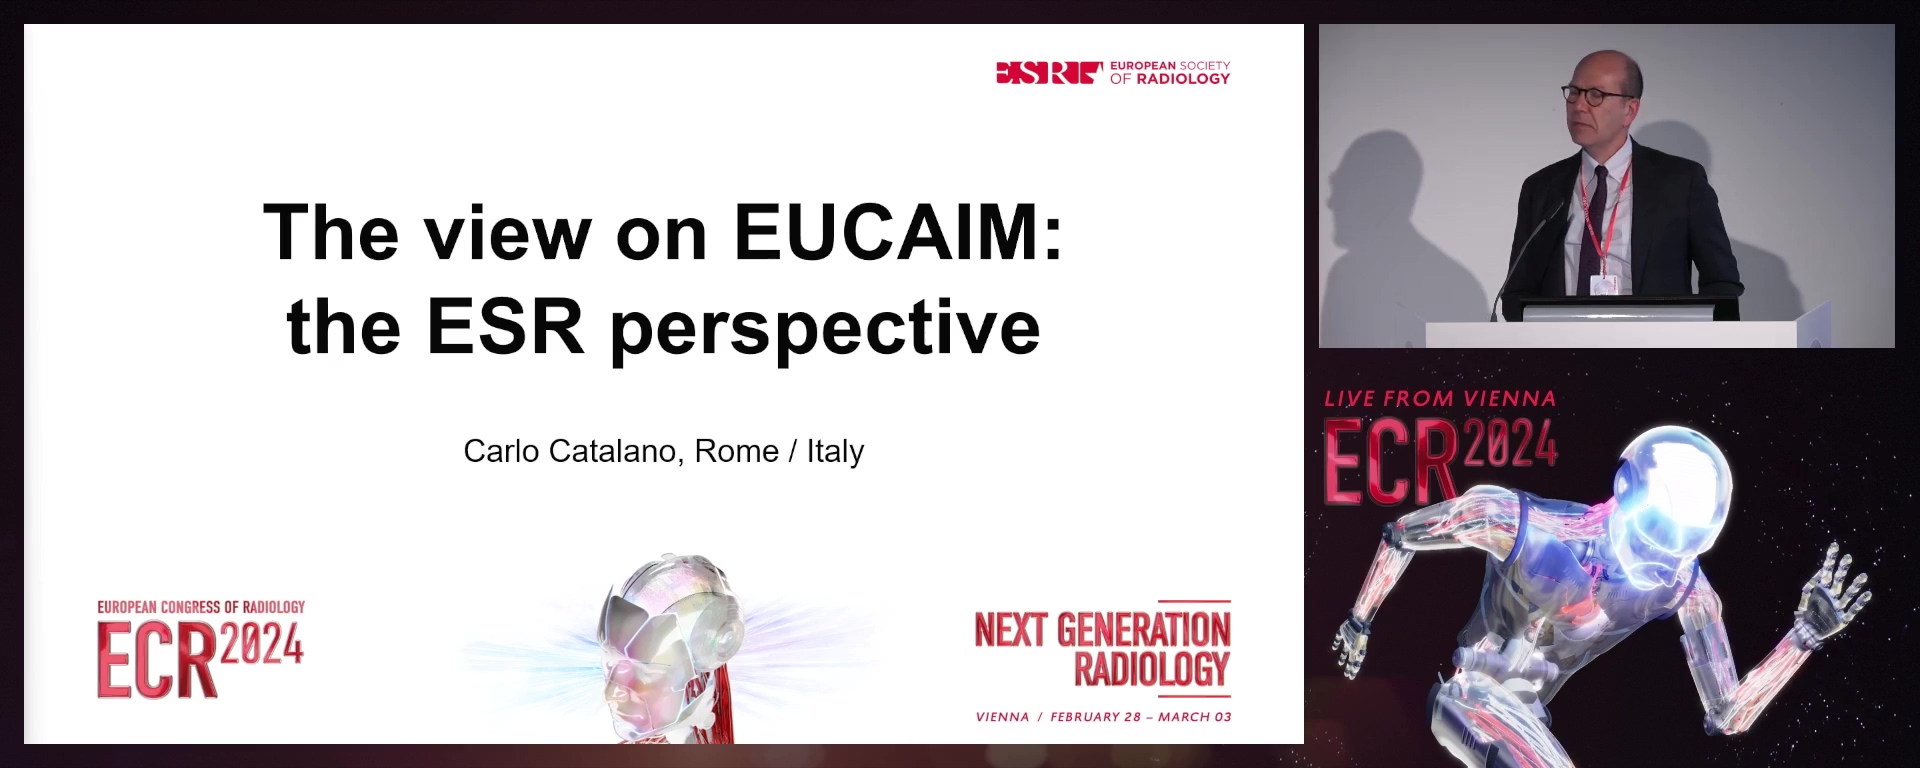 The view on EUCAIM: the ESR perspective